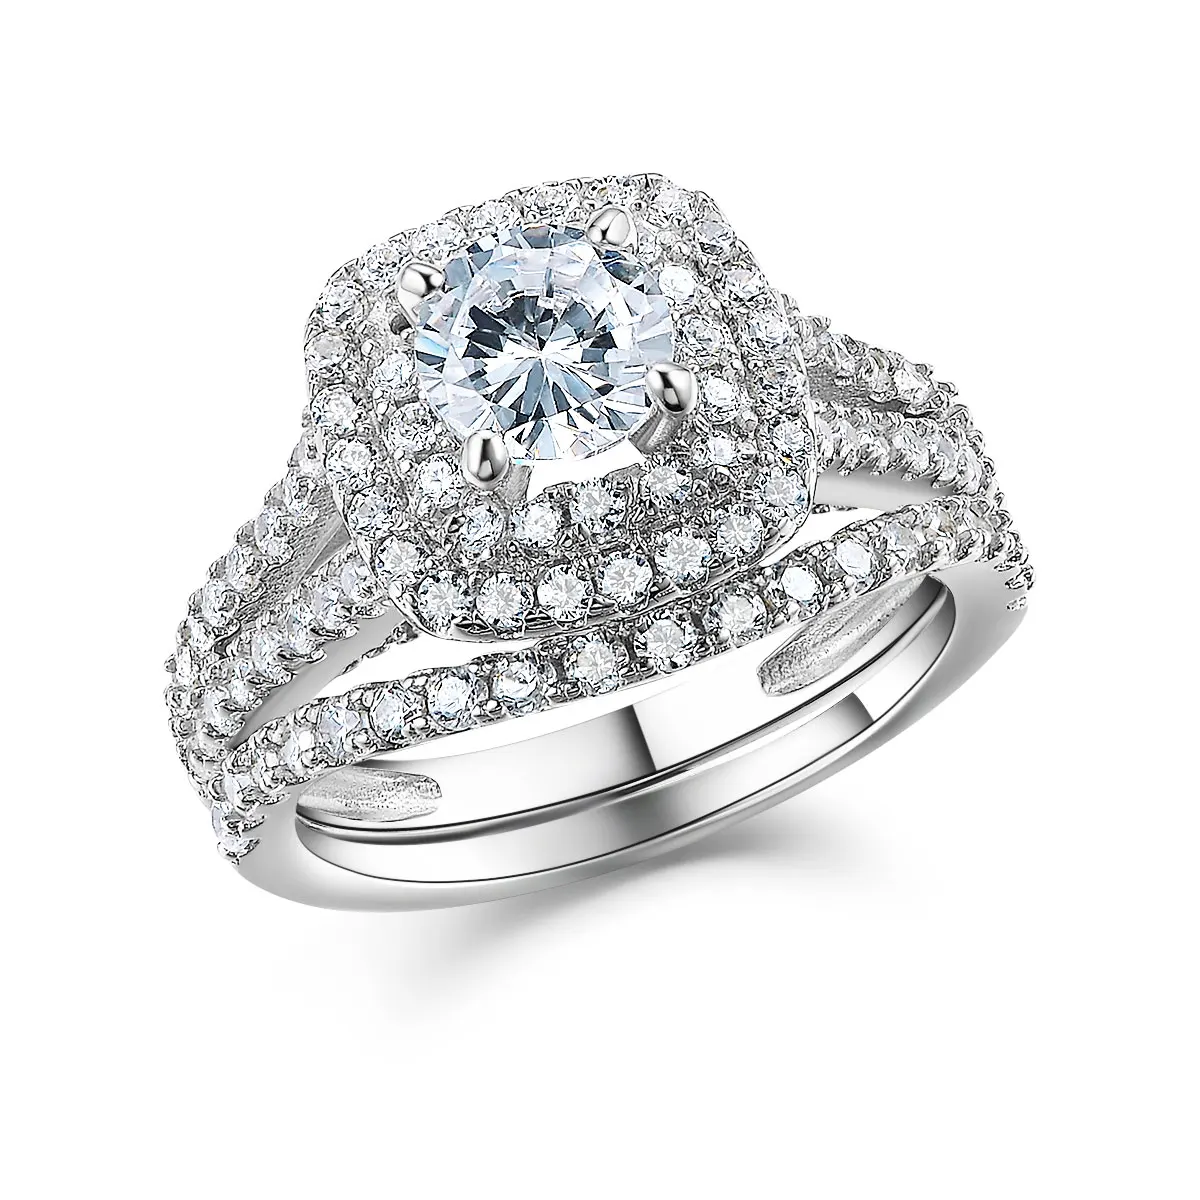 Details about   2 Ct White Round Cut Sapphire Mine CZ Vintage Style Engagement 925 Silver Ring 